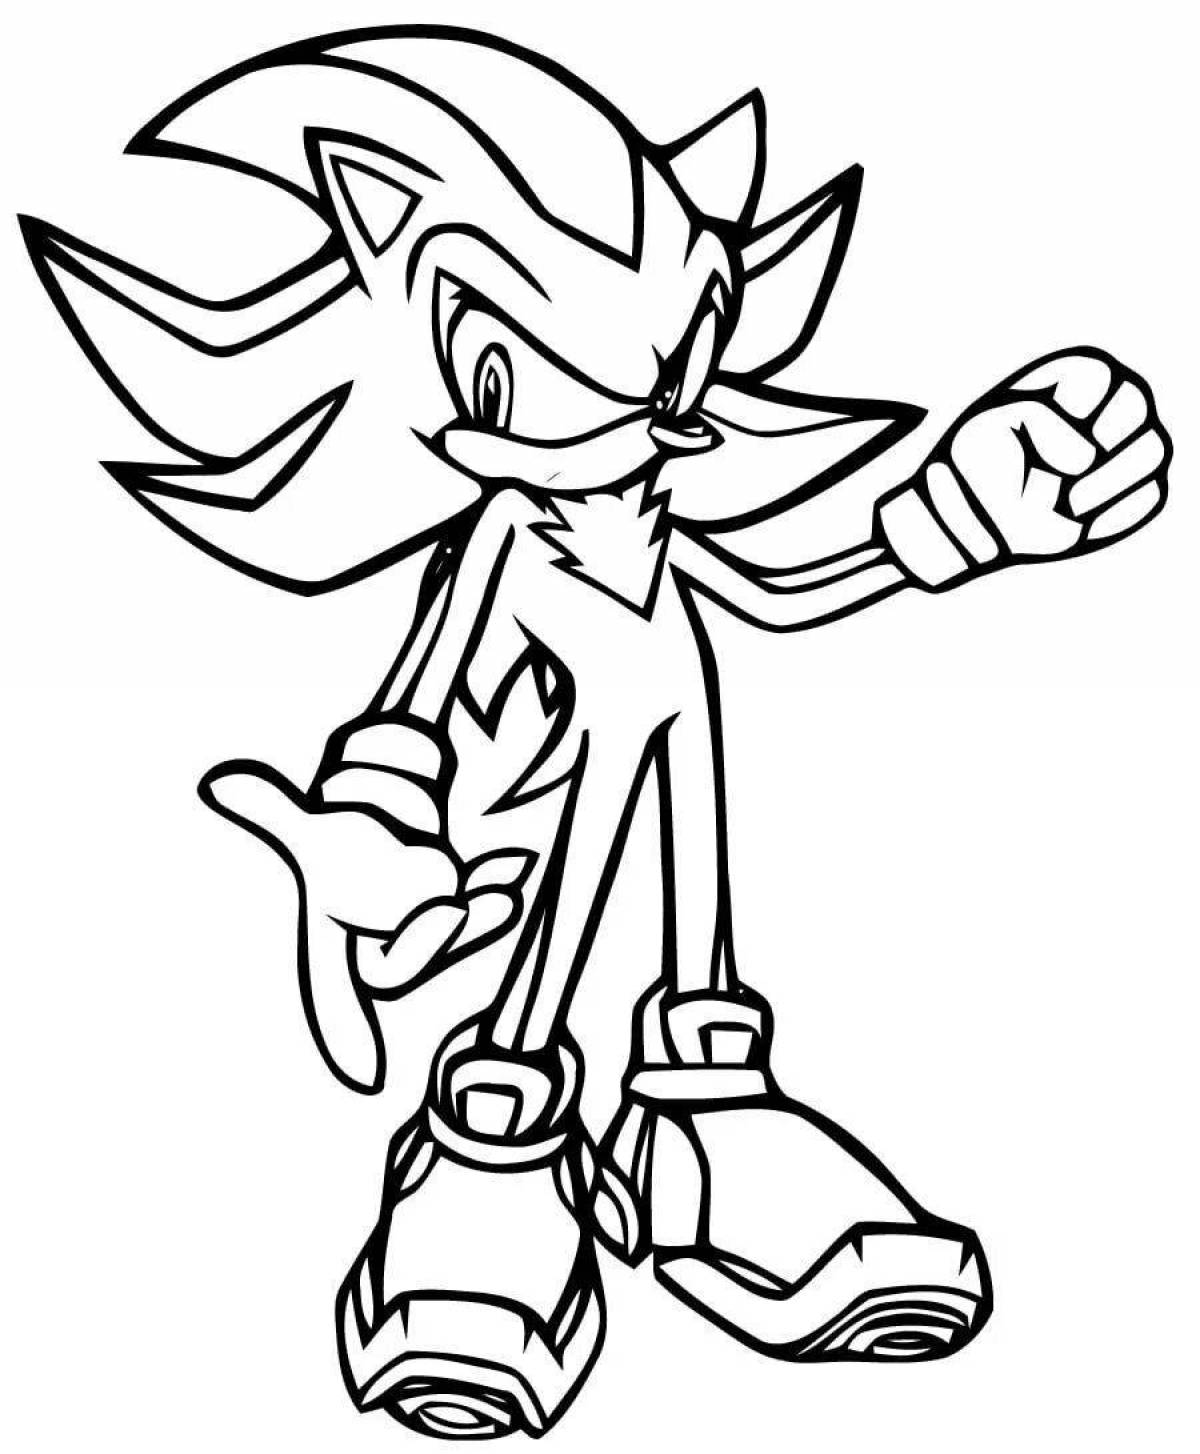 Powerful shadow coloring page